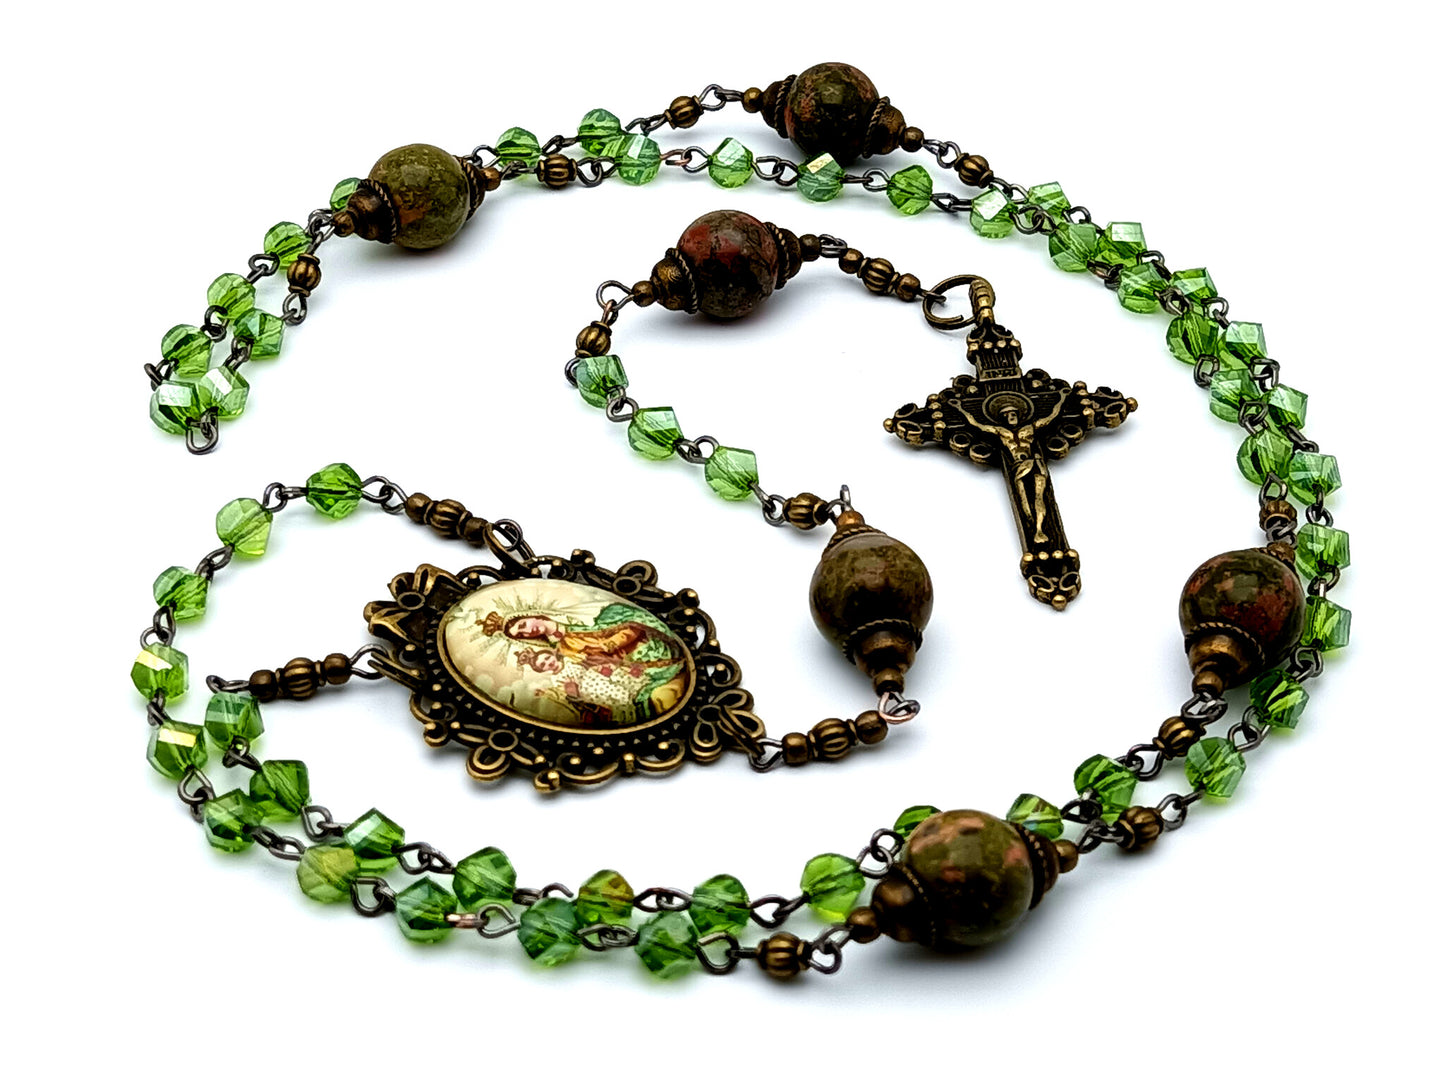 Vintage style Our Lady of Mount Carmel unique rosary beads with glass and jasper gemstone beads and brass crucifix.